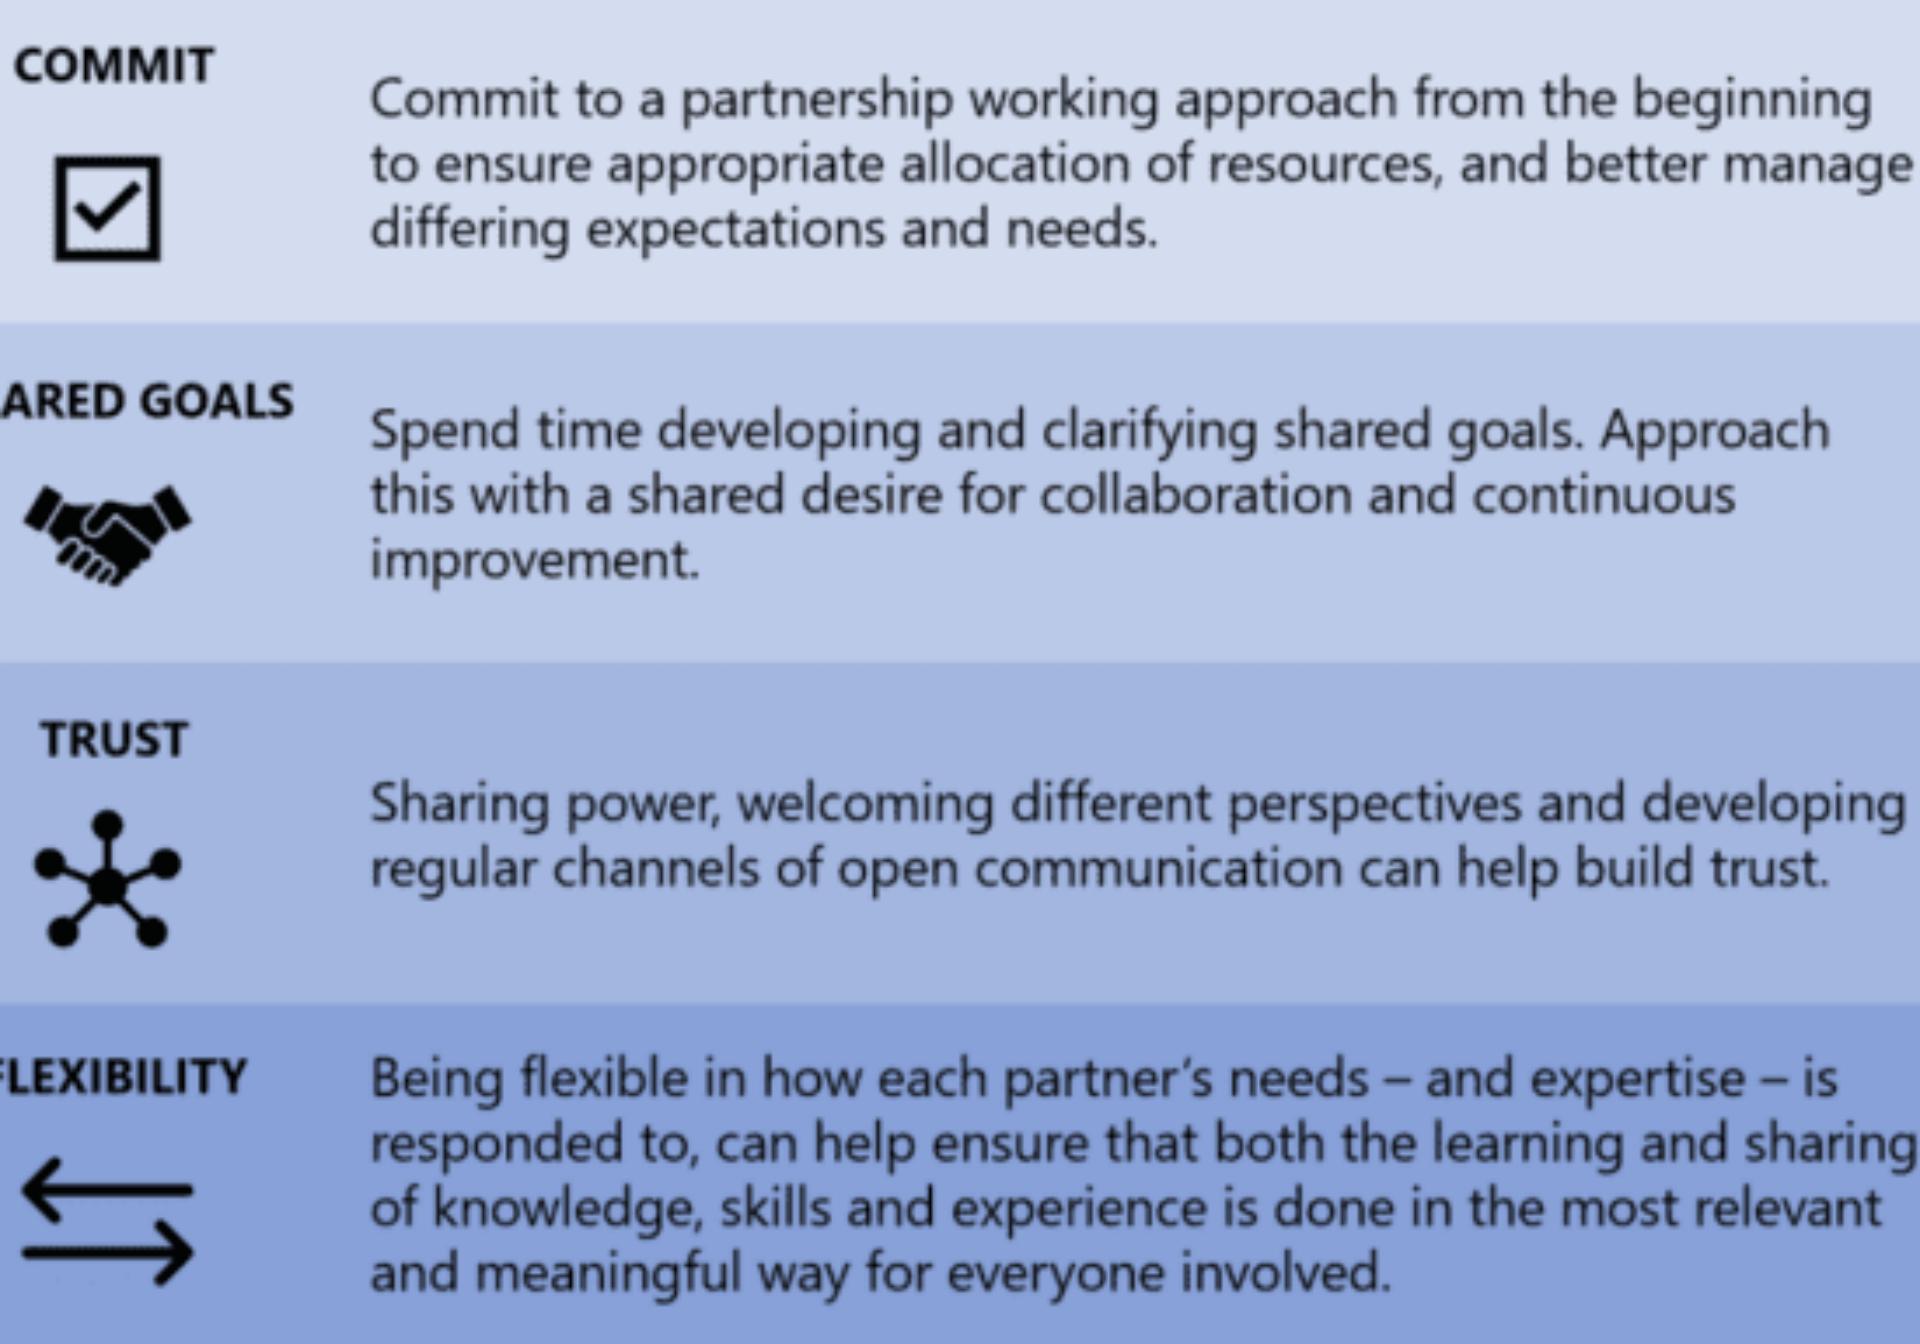 How to make partnership working across sectors effective